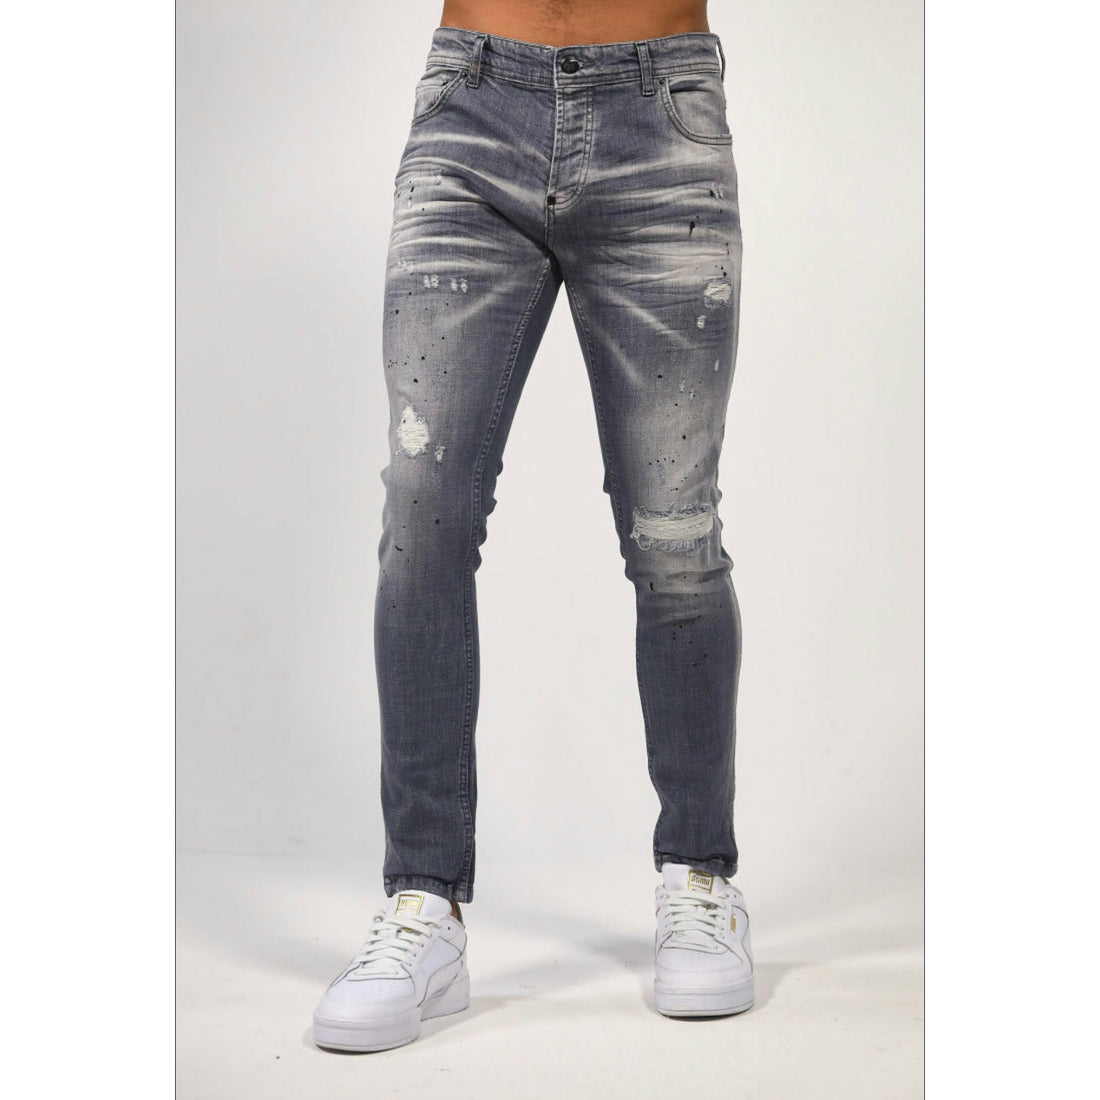 Ultra 653 UniPlay Slim-Fit Jeans - Gray